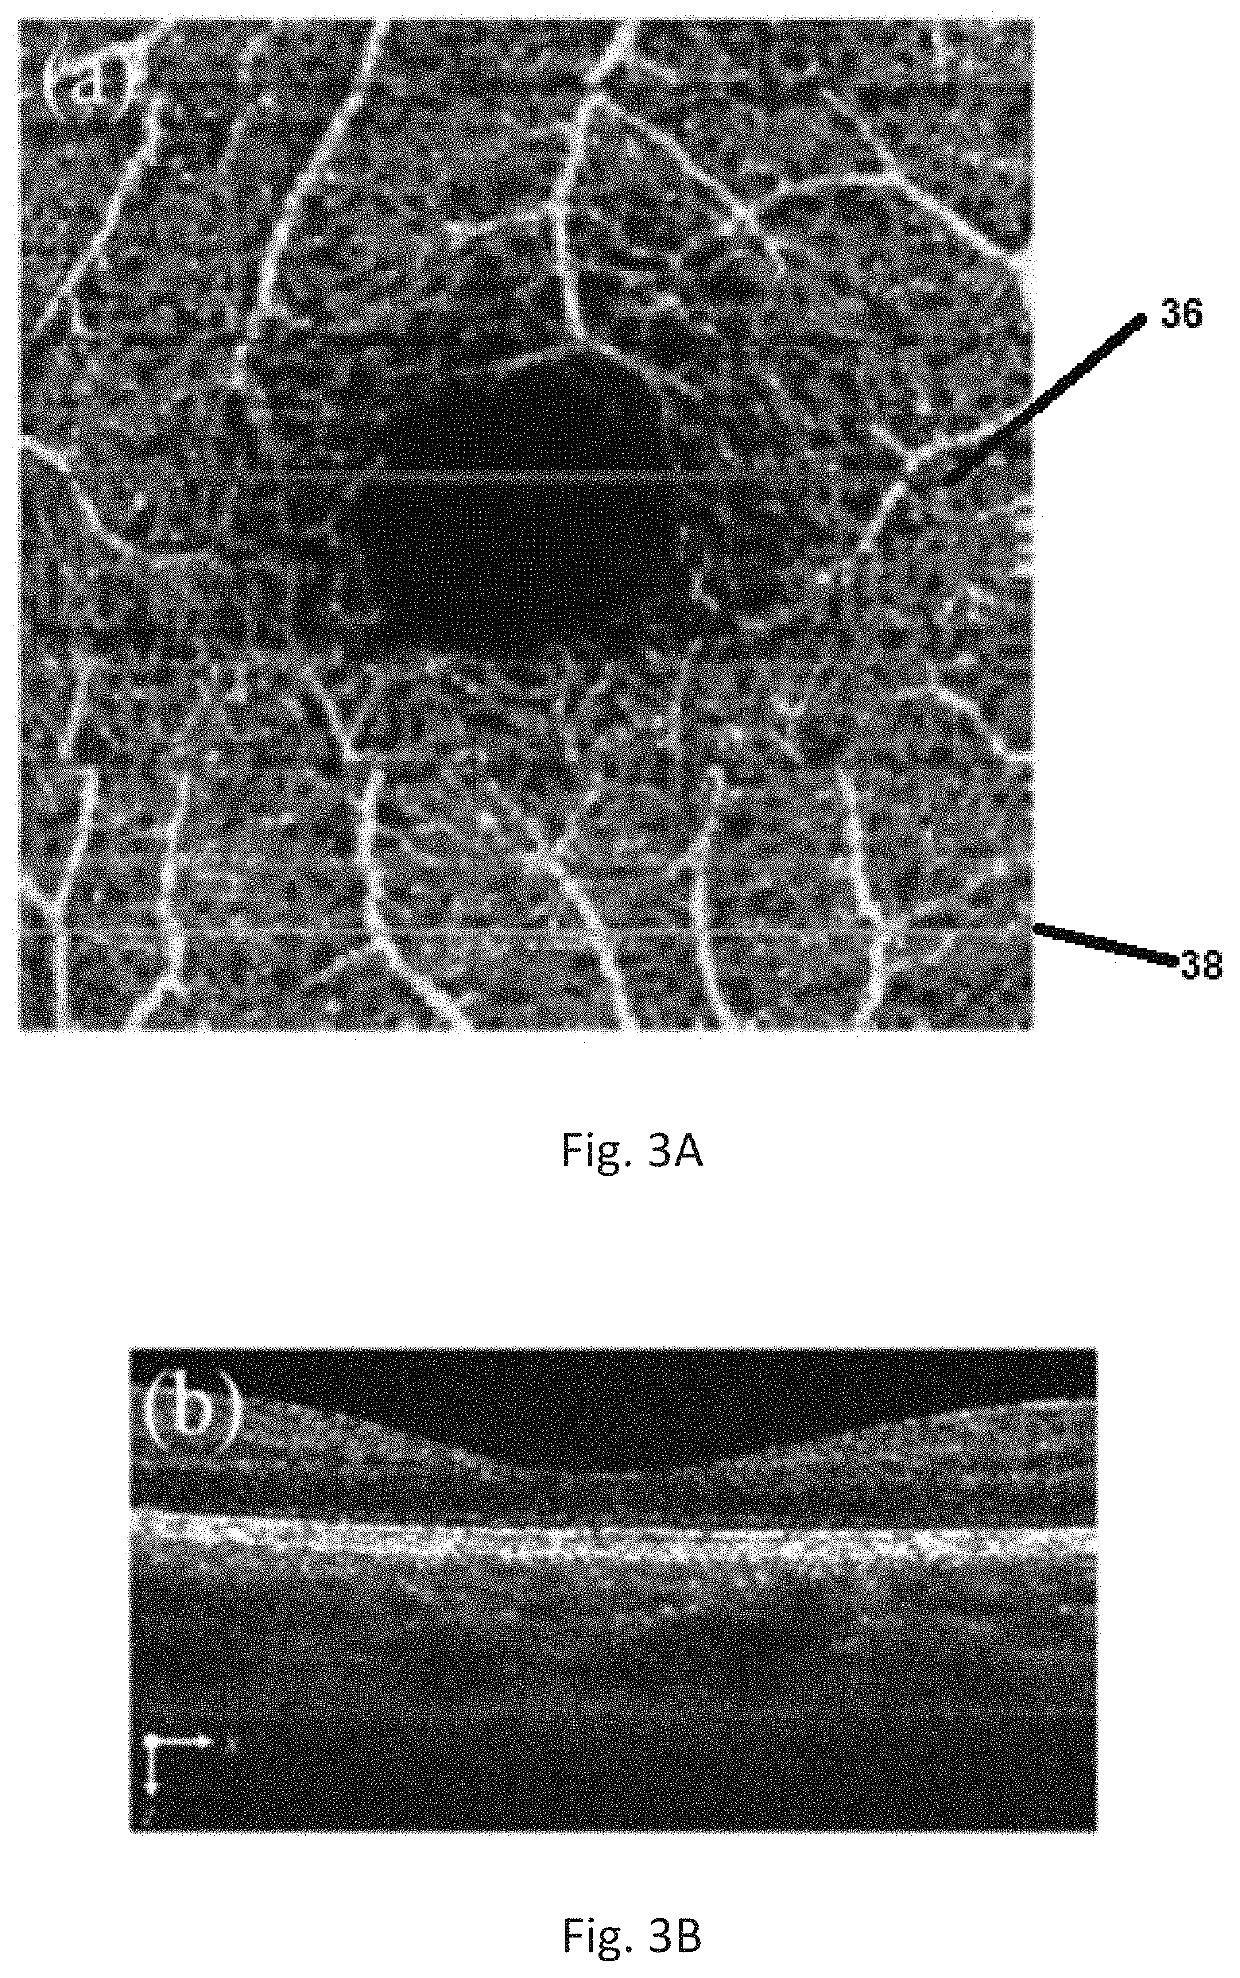 Automatic three-dimensional segmentation method for OCT and doppler OCT angiography